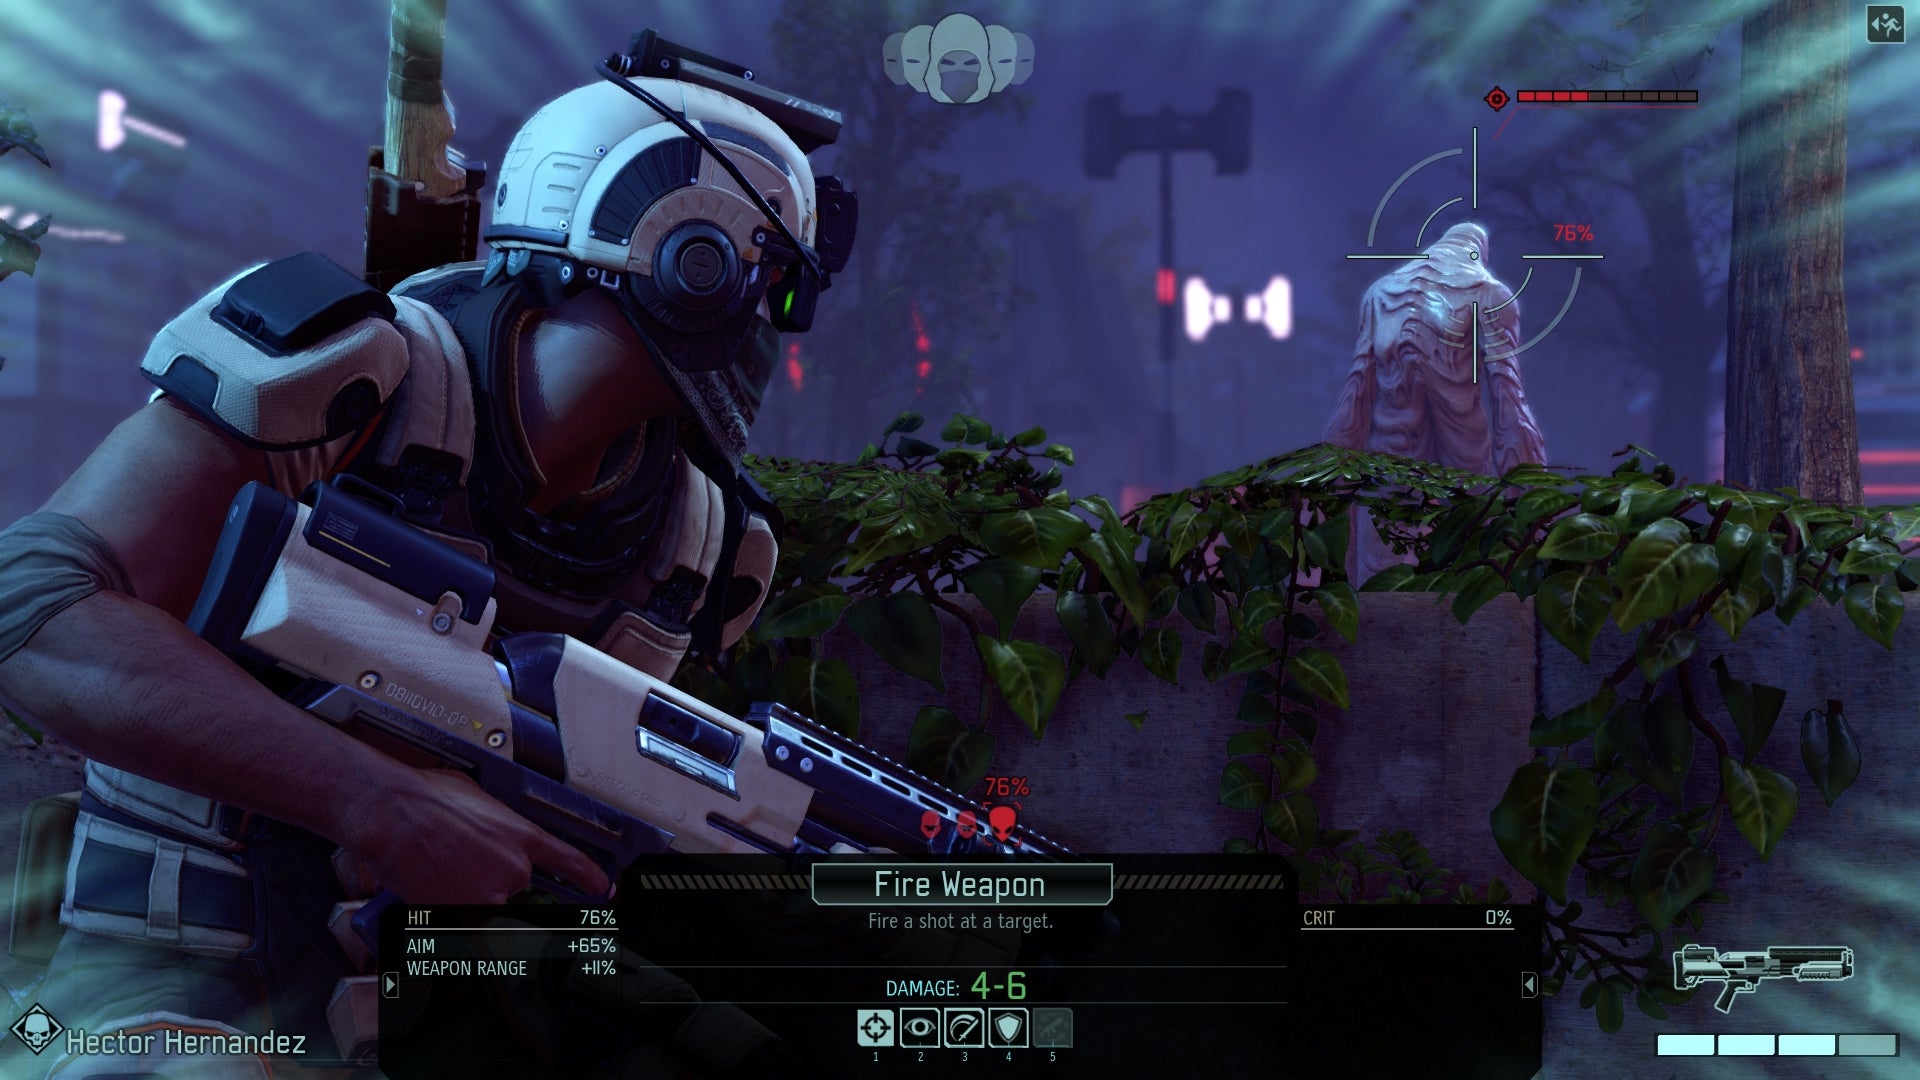 A soldier closes in on an alien in XCOM 2